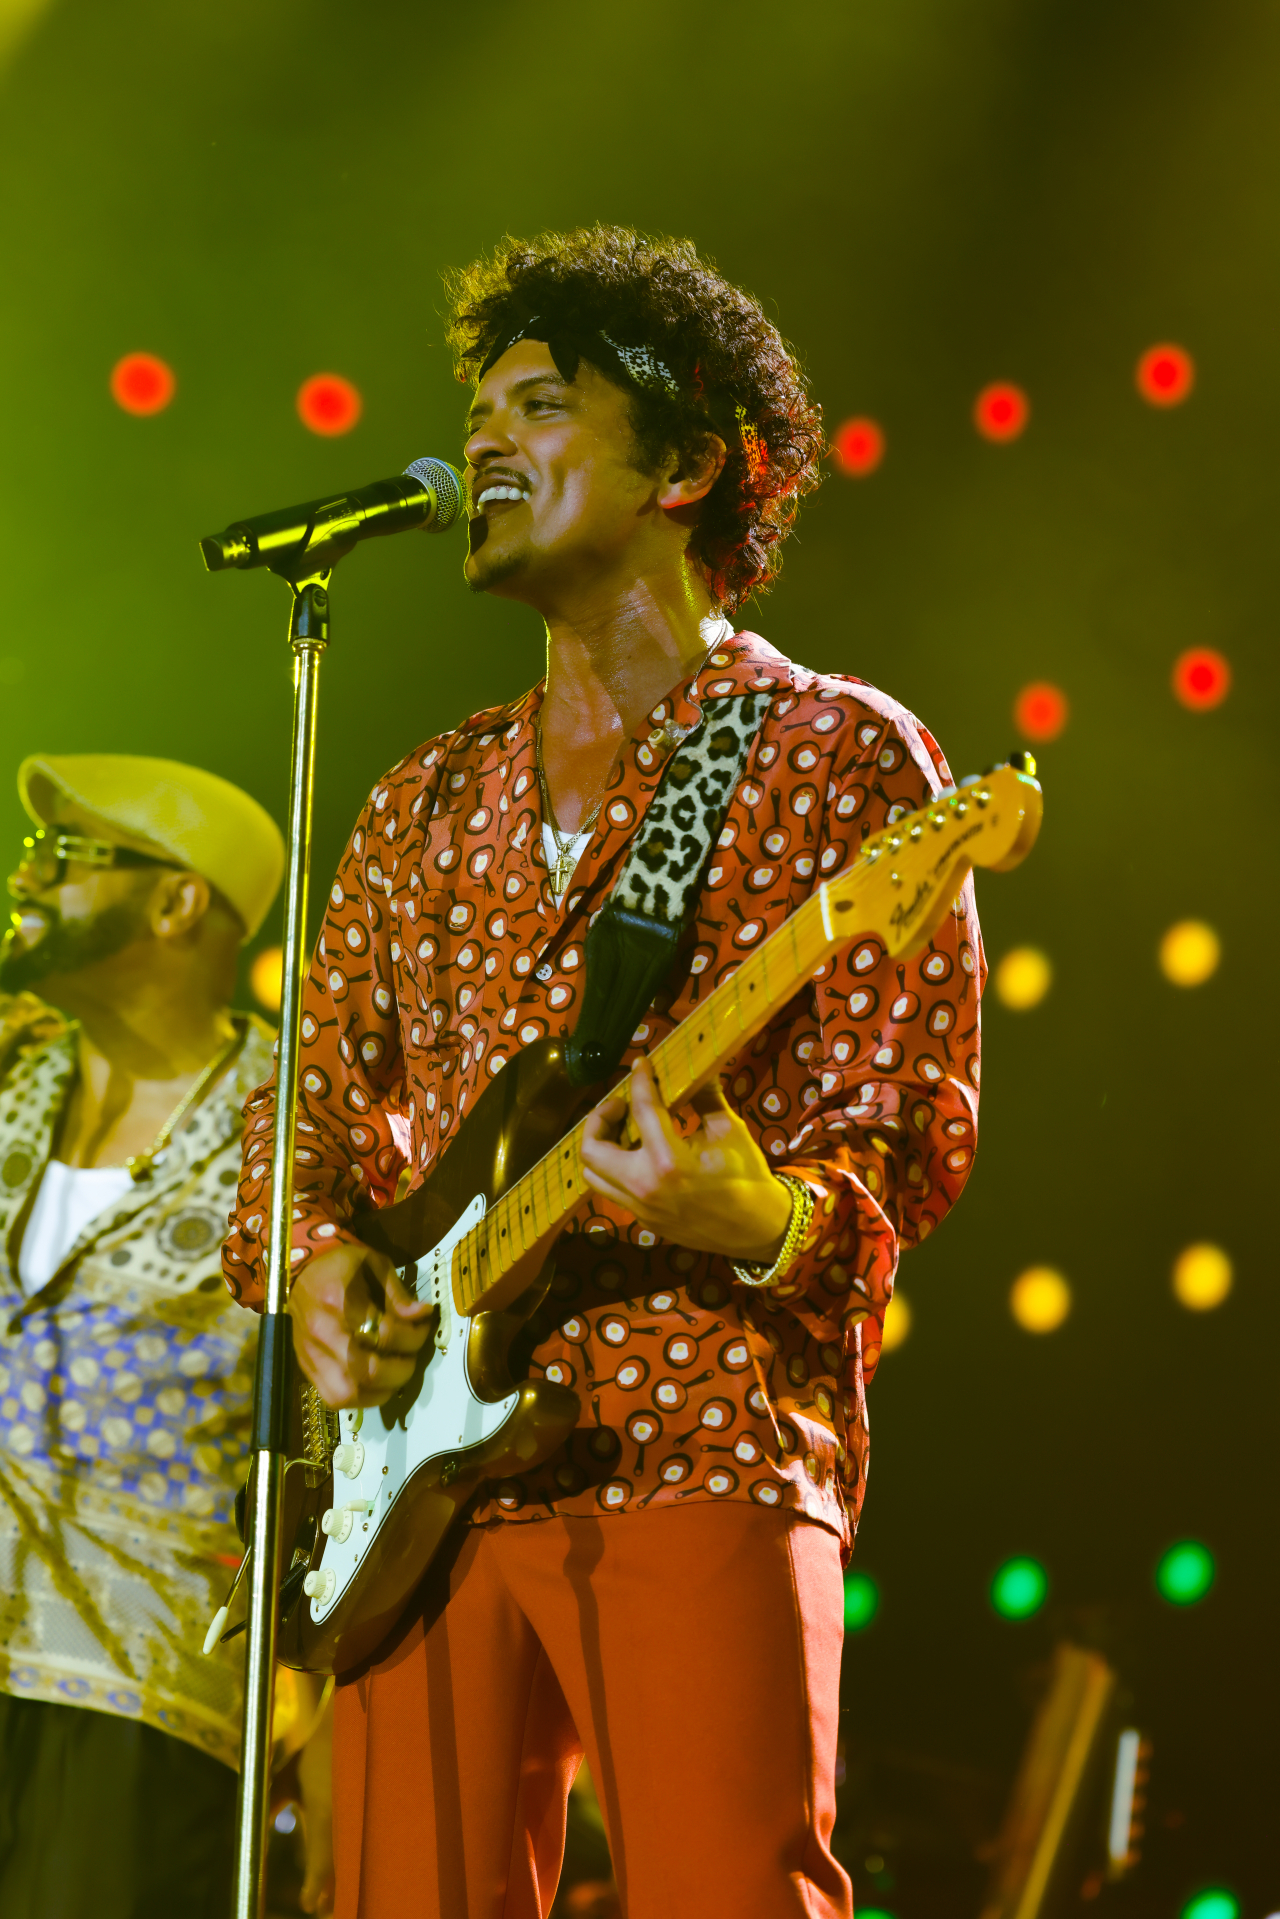 US singer-songwriter Bruno Mars performs during the ″Hyundai Card Super Concert 27 Bruno Mars″ concert held on Saturday and Sunday at the Jamsil Olympic Main Stadium, southern Seoul. (Hyundai Card)